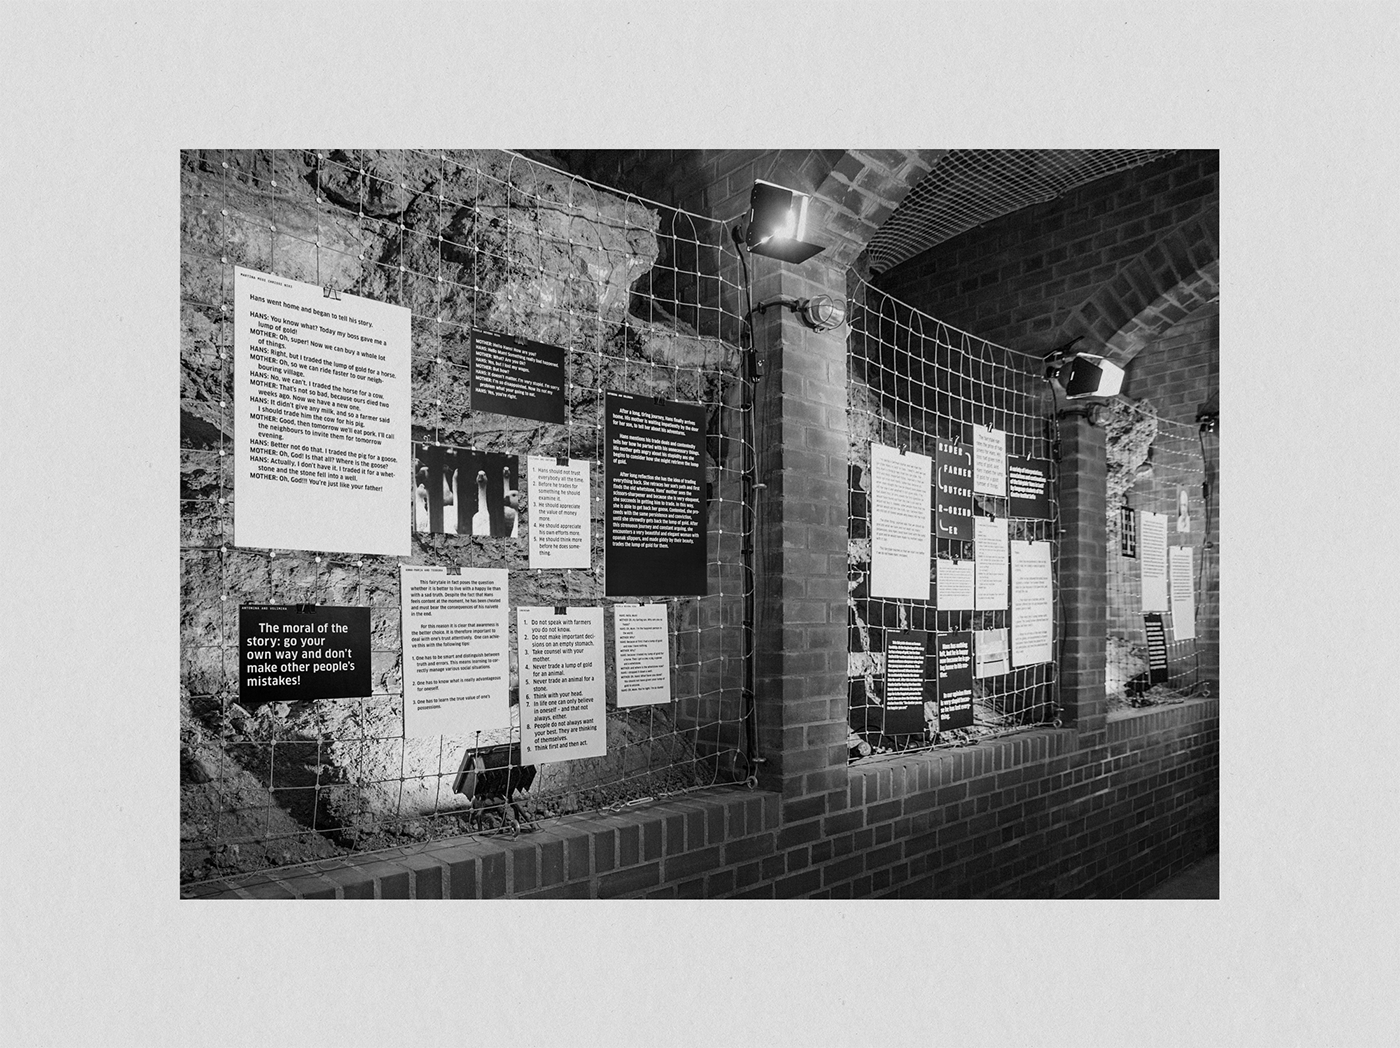 Exhibition  Exhibition Design  typography   Hans in Luck fairytale brothers grimm scenography black and white